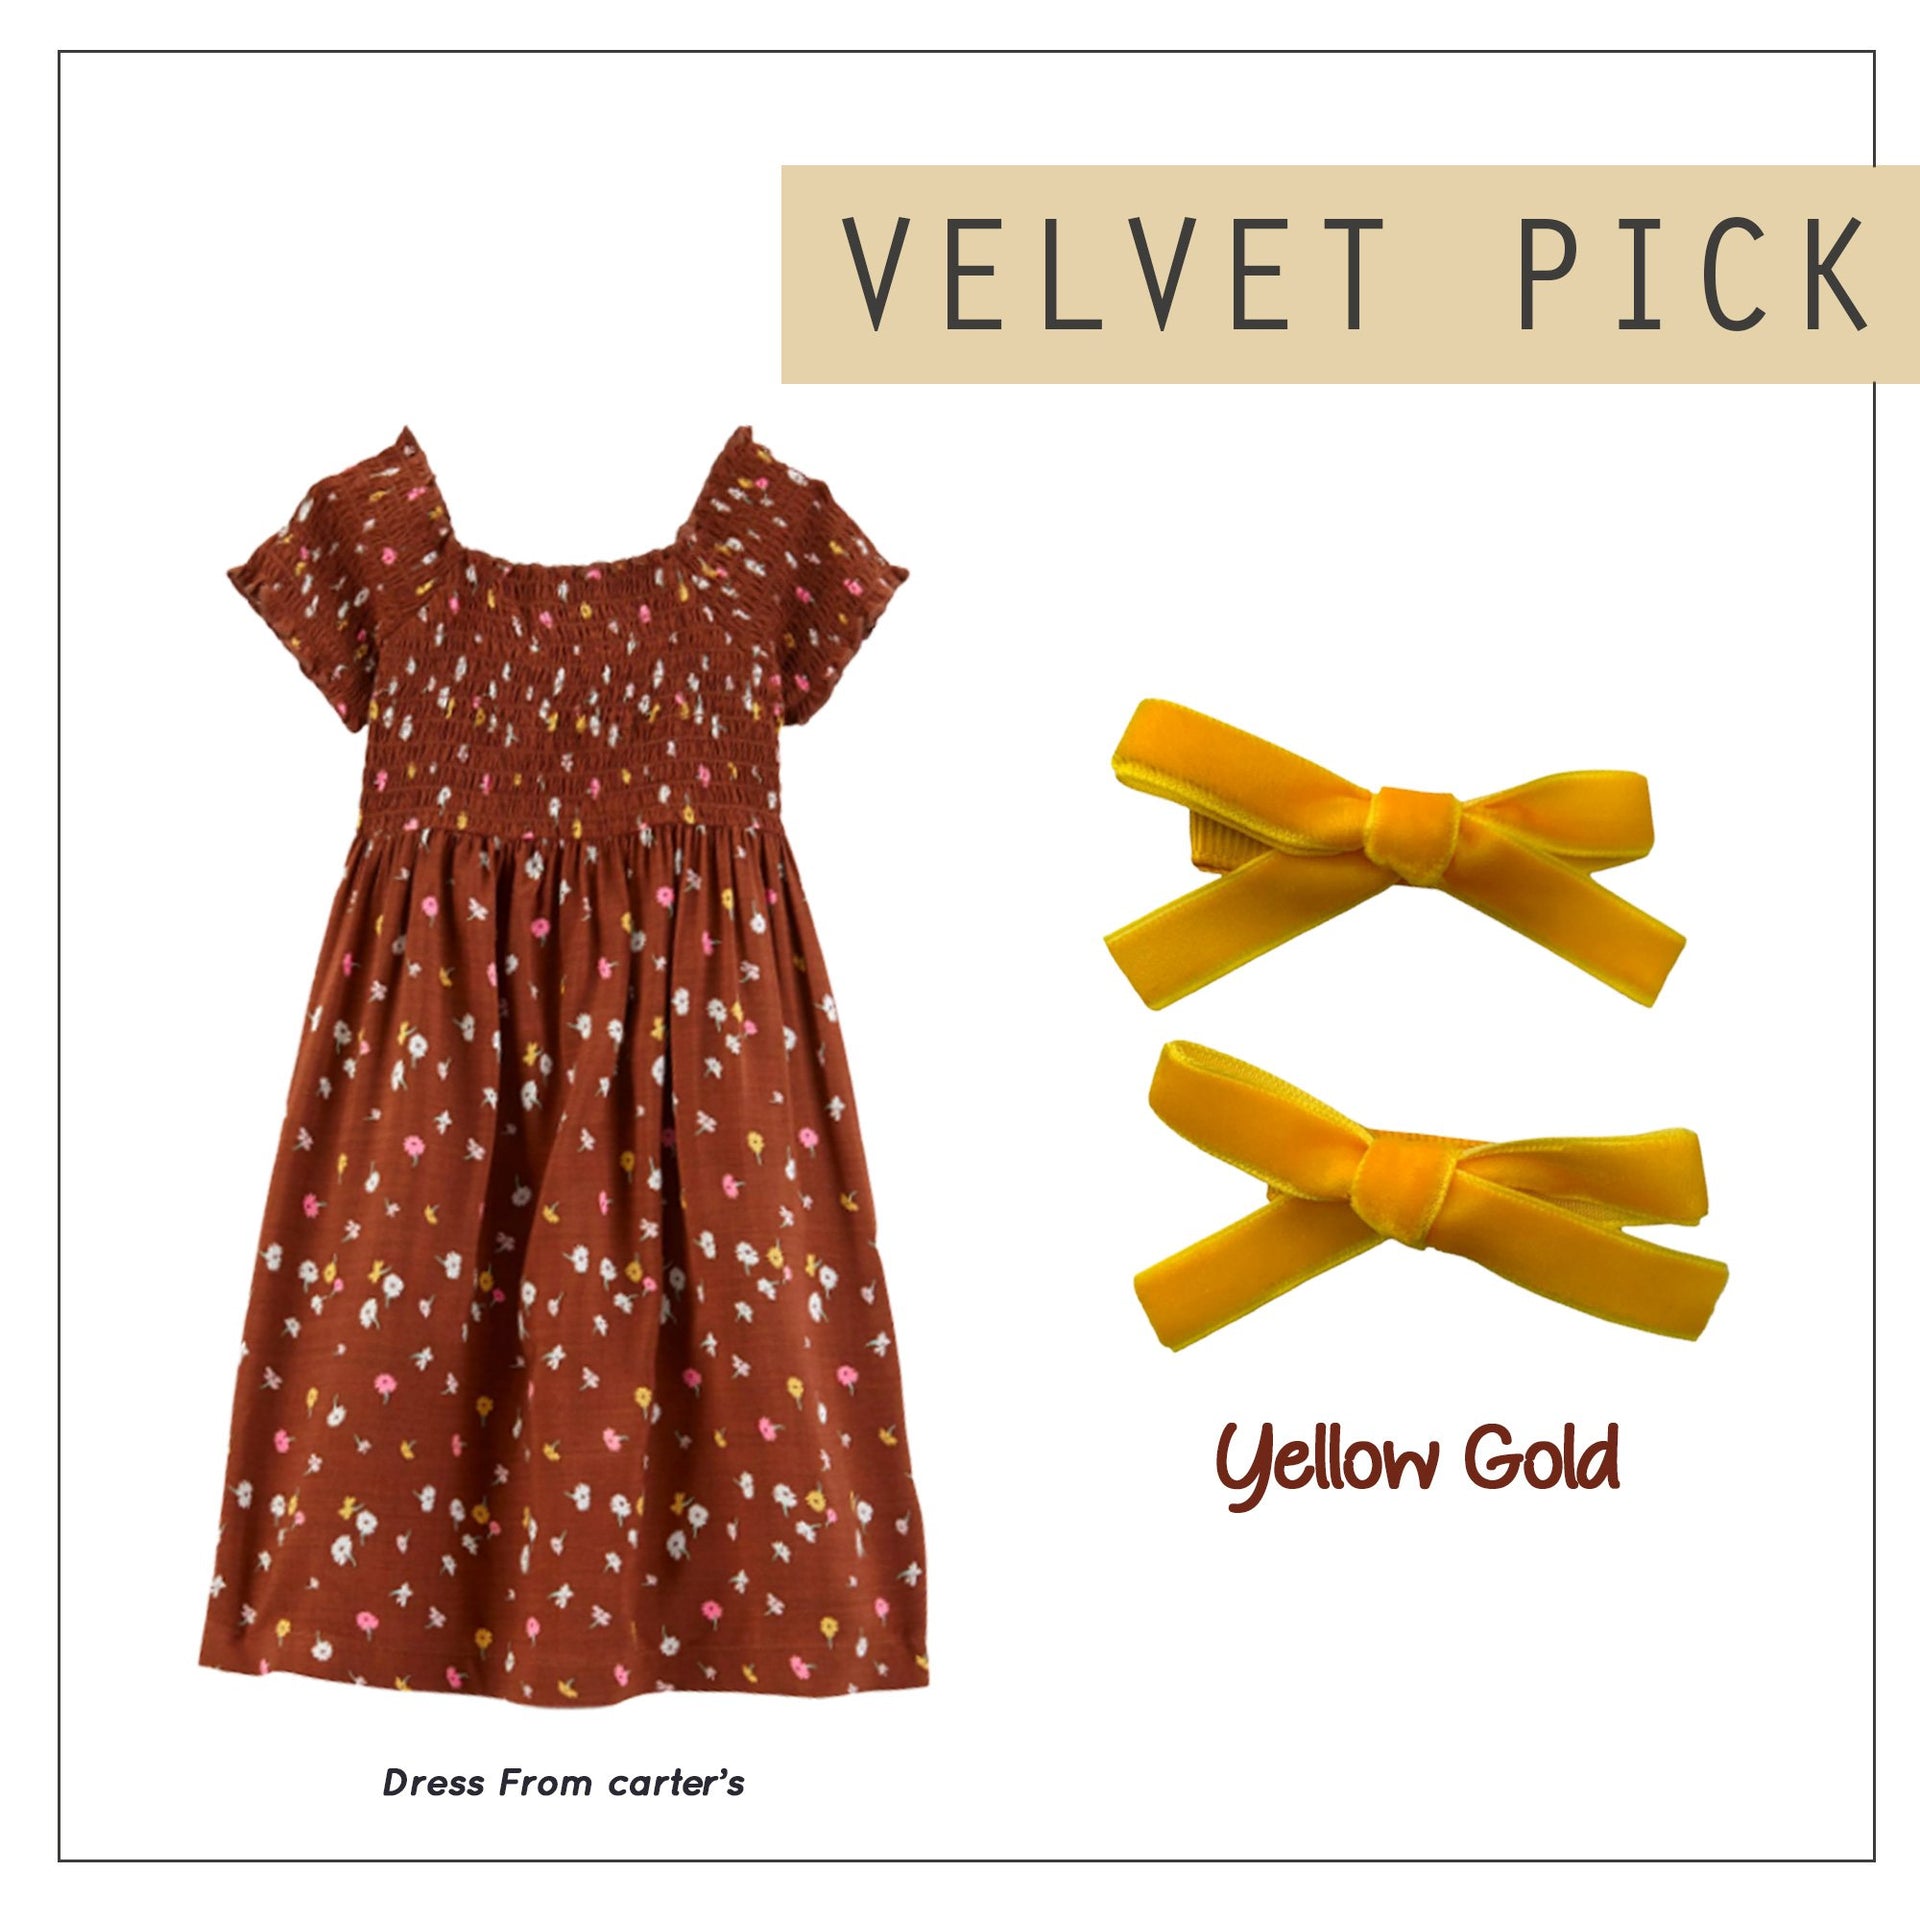 Style her outfit with gorgeous VELVET Accessories | Go Velvet!